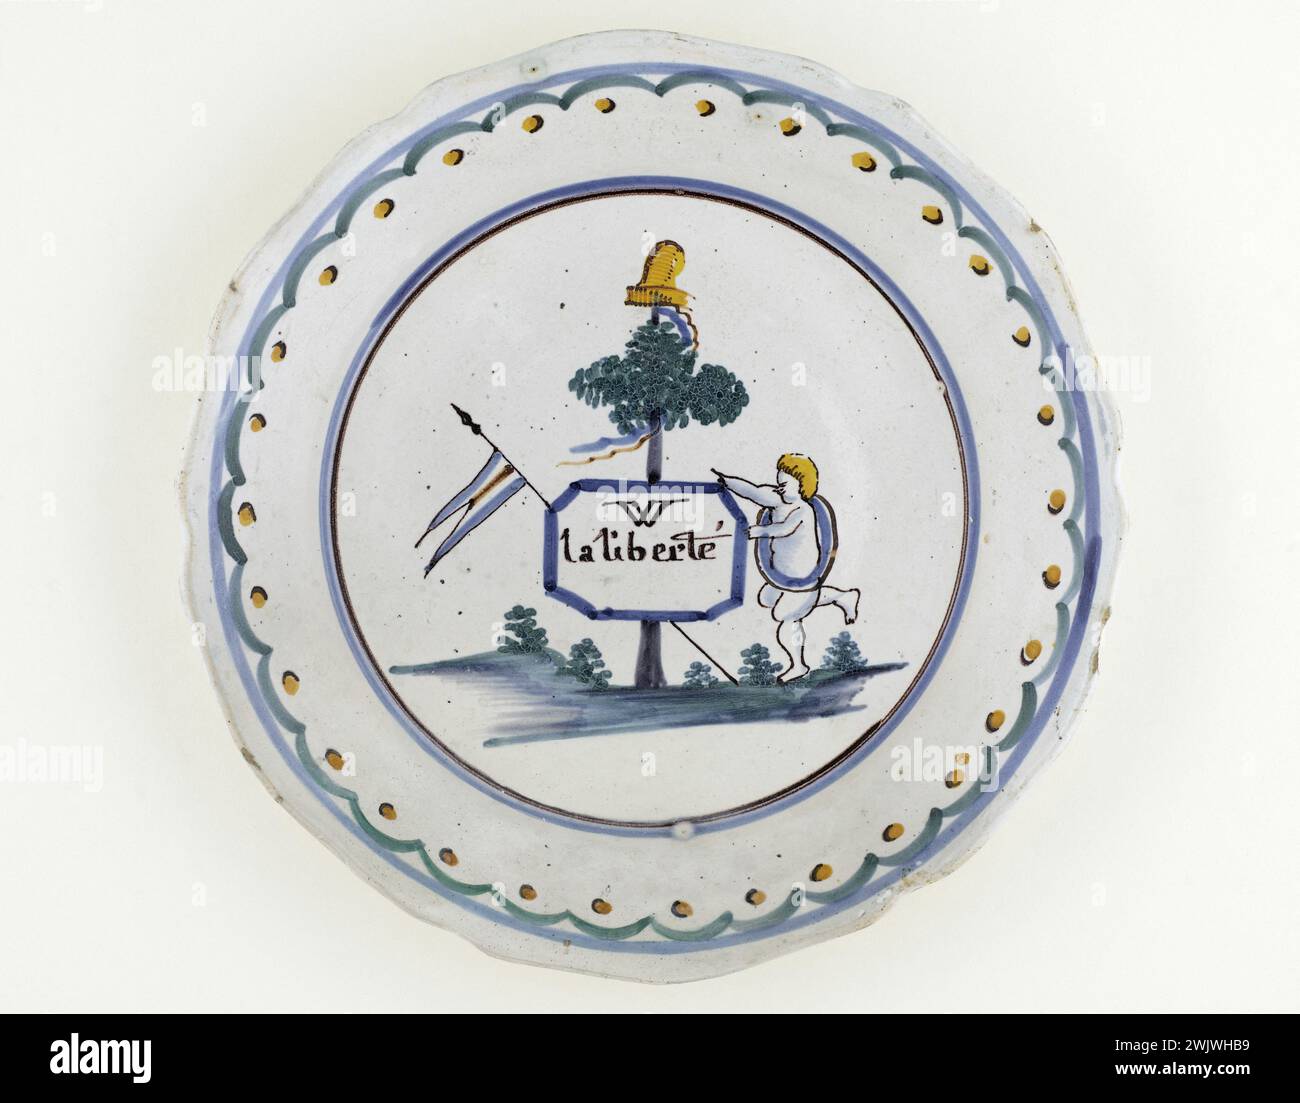 Anonymous. Plate at the Tree of Liberty. Earthenware. 1792. Paris, Carnavalet museum. 72429-51 Tree, Phrygian Bonnet, Flag, Faience, Liberte, Revolutionary Periode, French Revolution, Plate Stock Photo